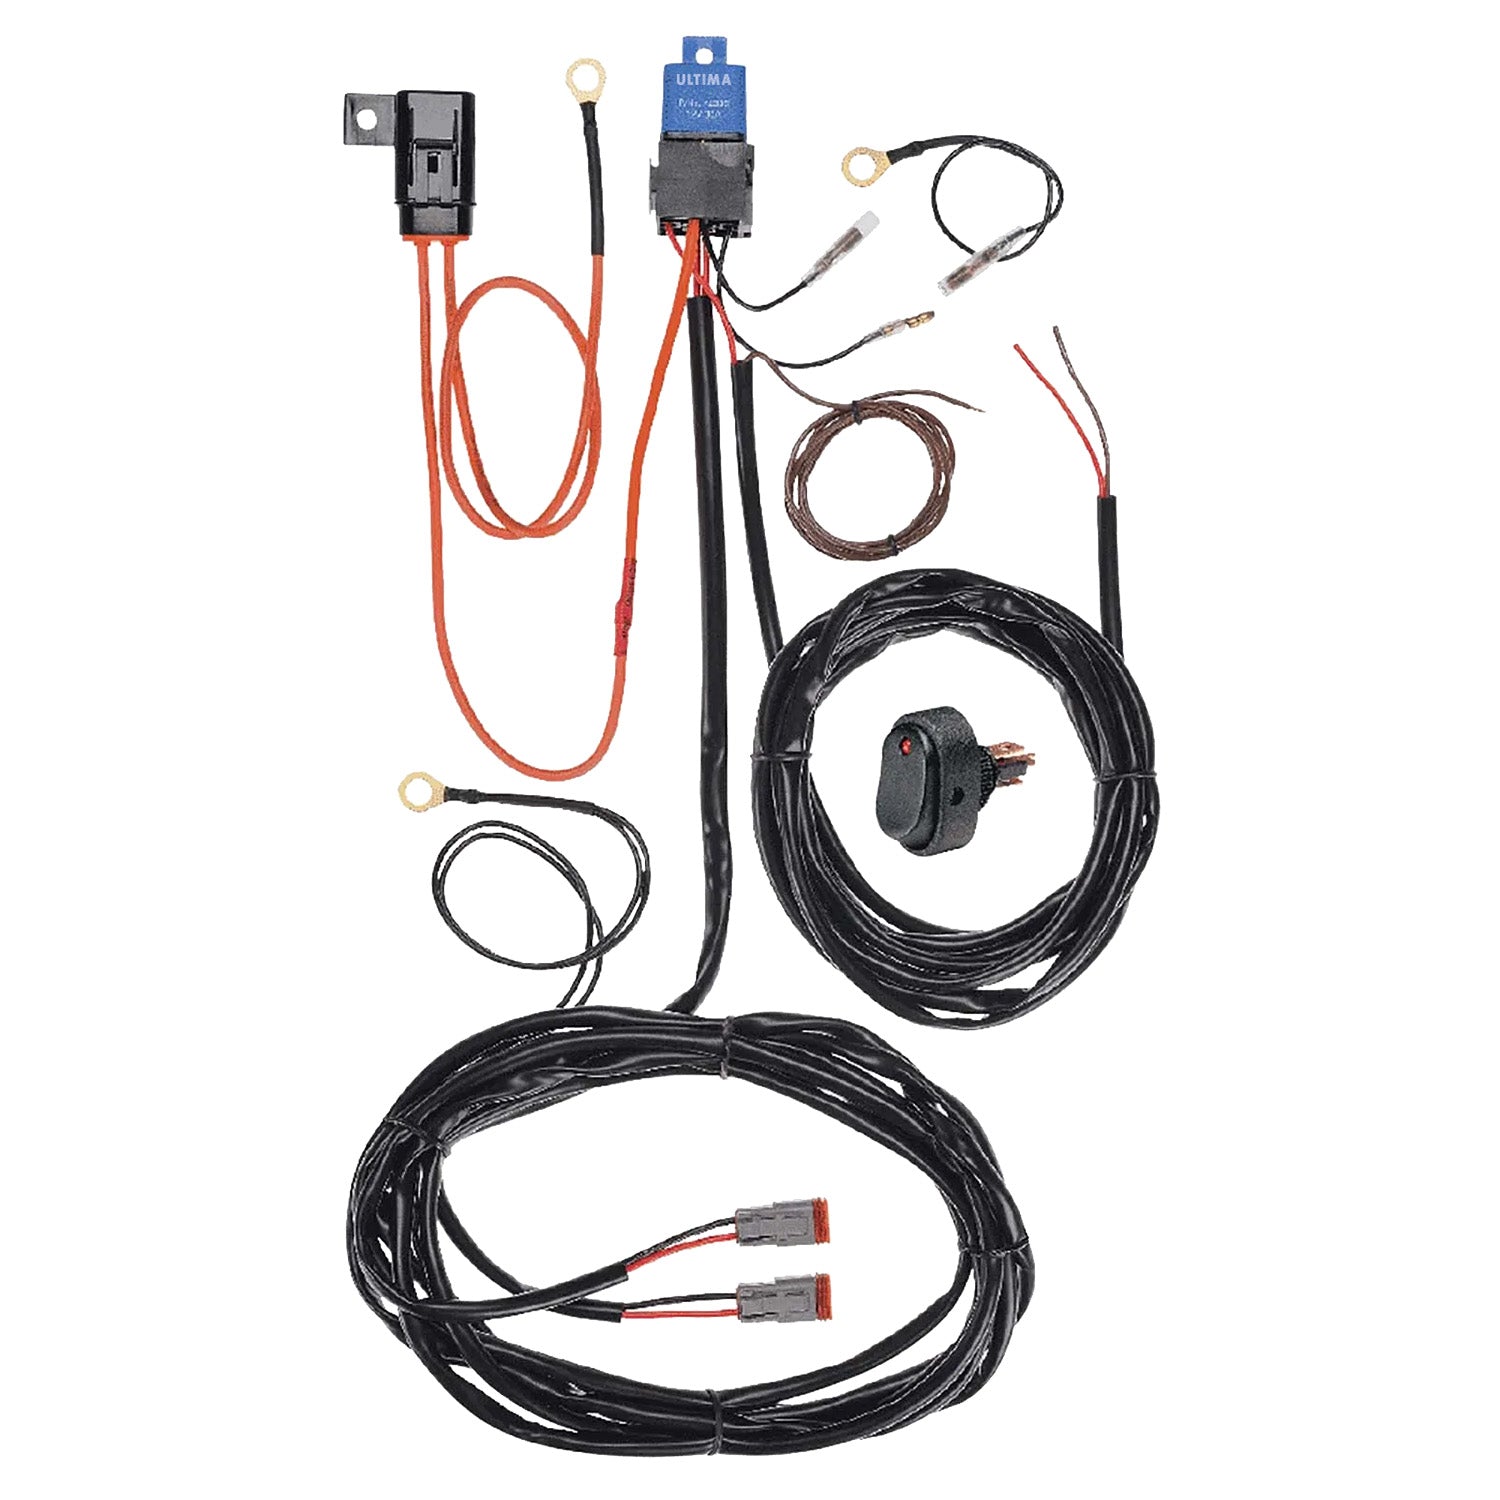 12V Wiring Harness Kit (2-Pin DT Connectors included)